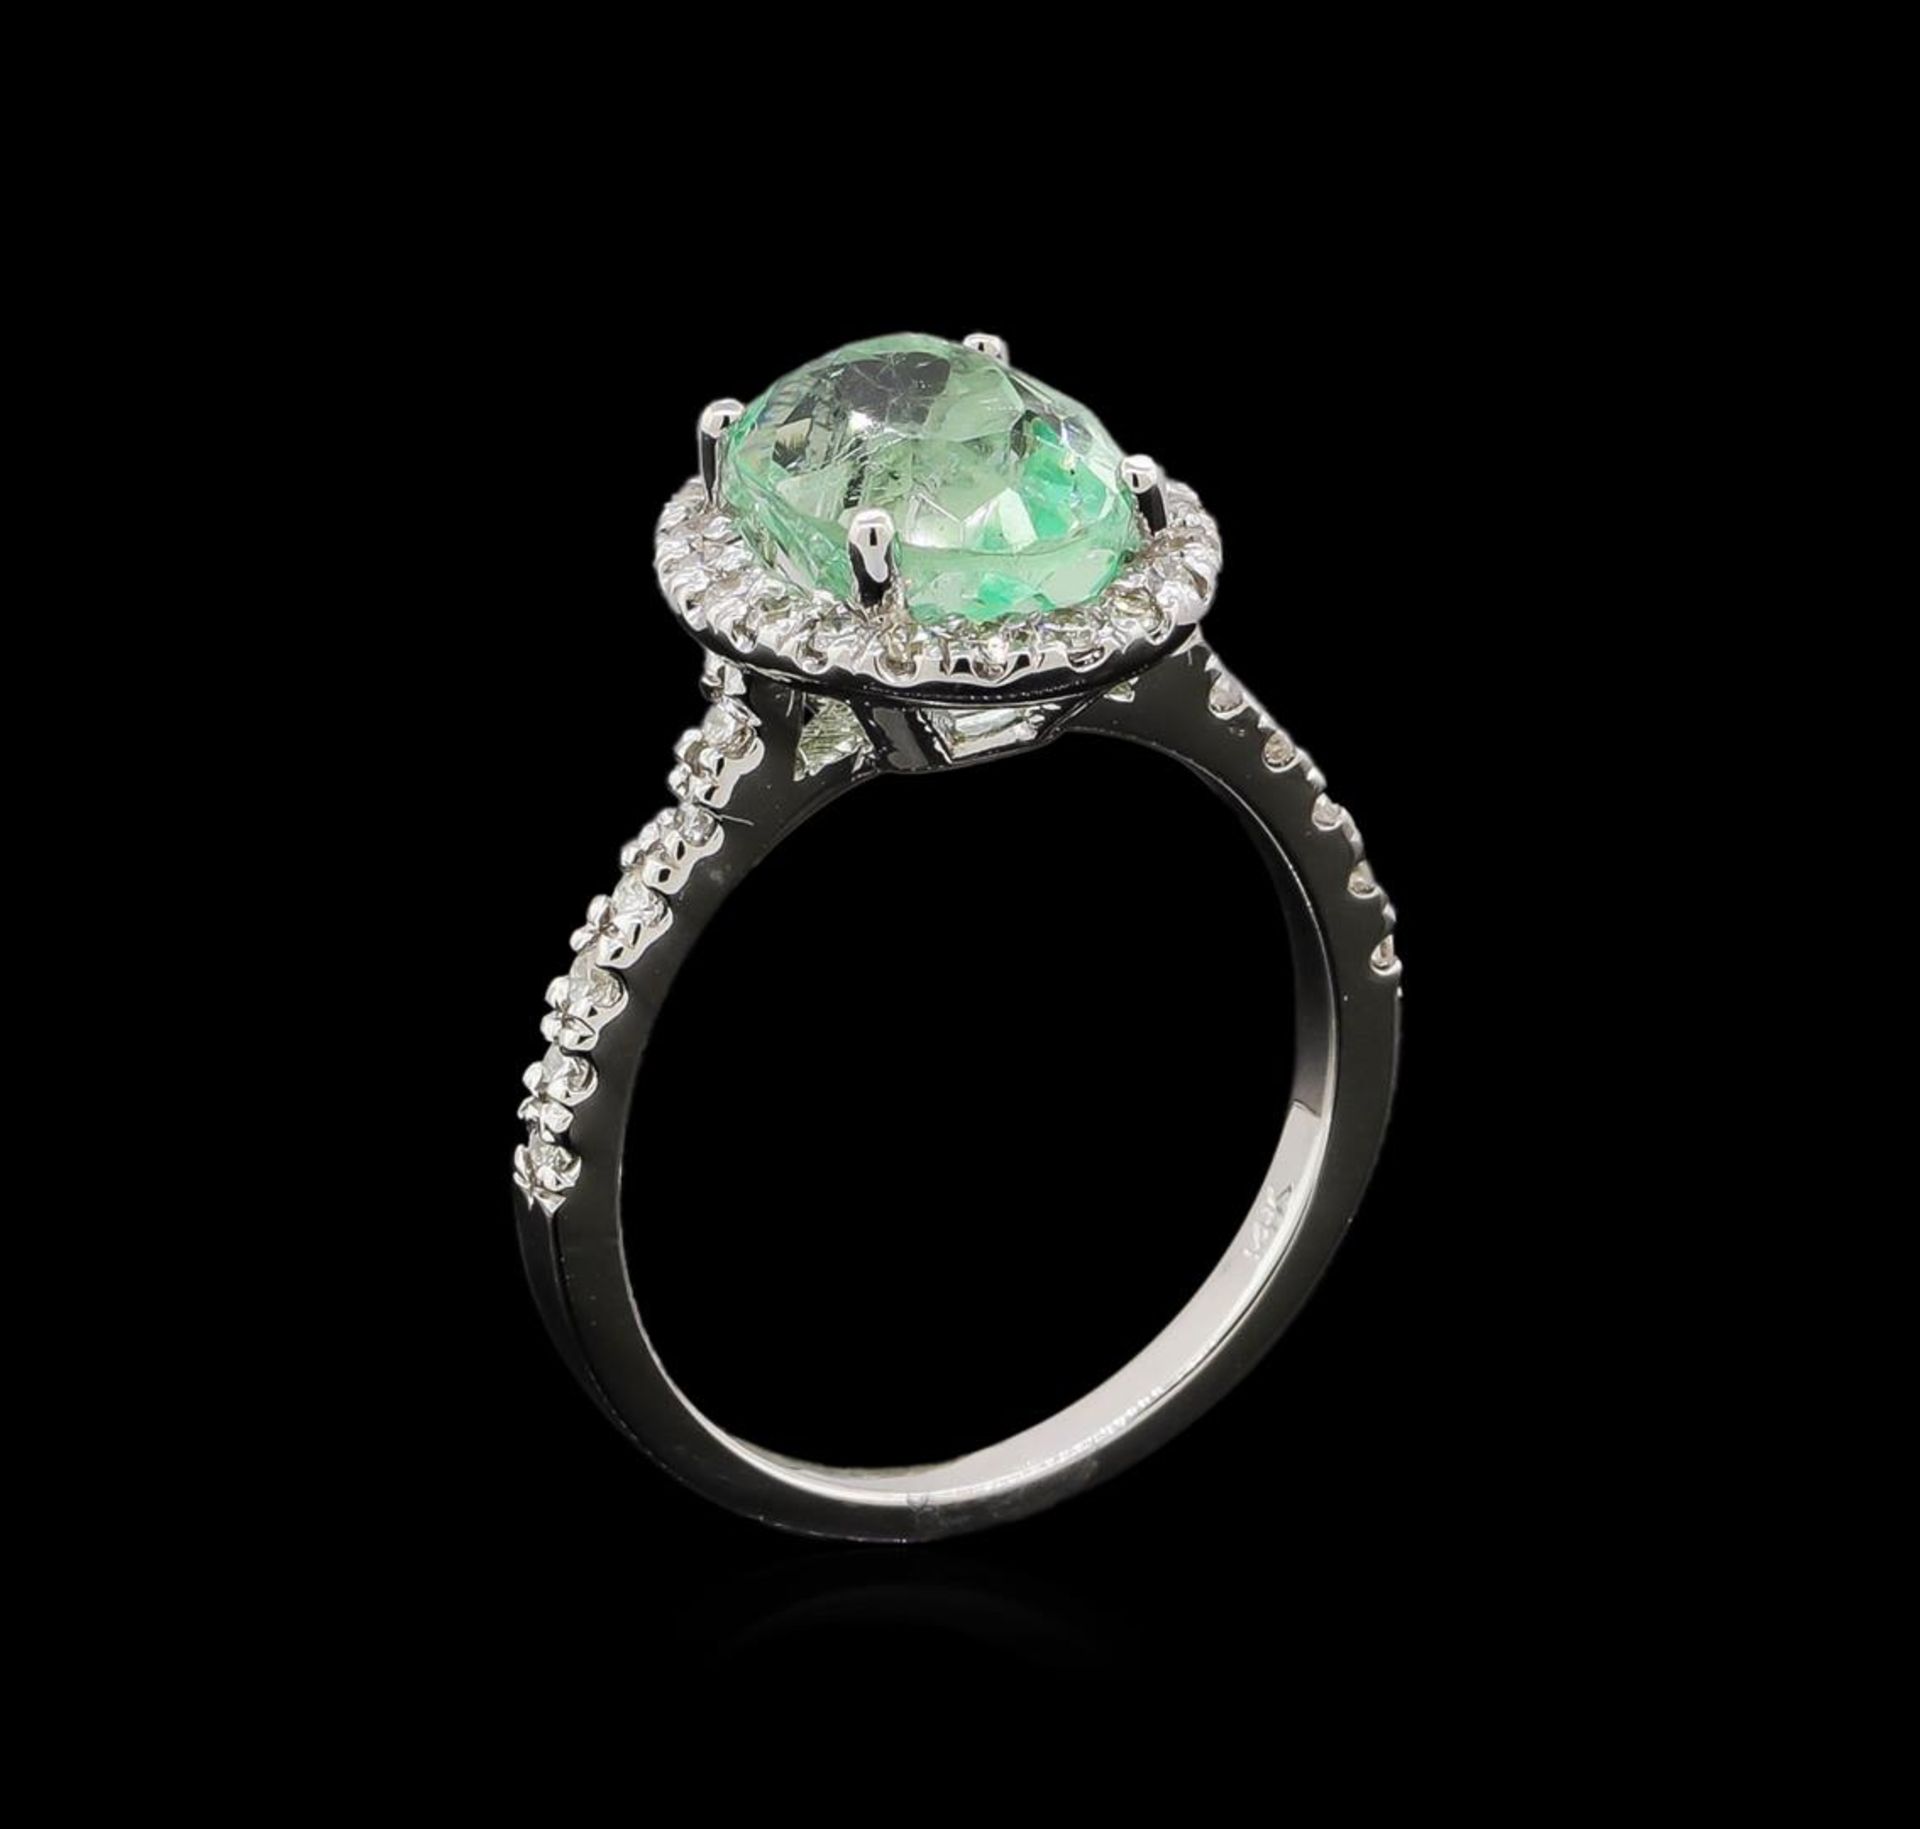 2.75 ctw Emerald and Diamond Ring - 14KT White Gold - Image 4 of 5